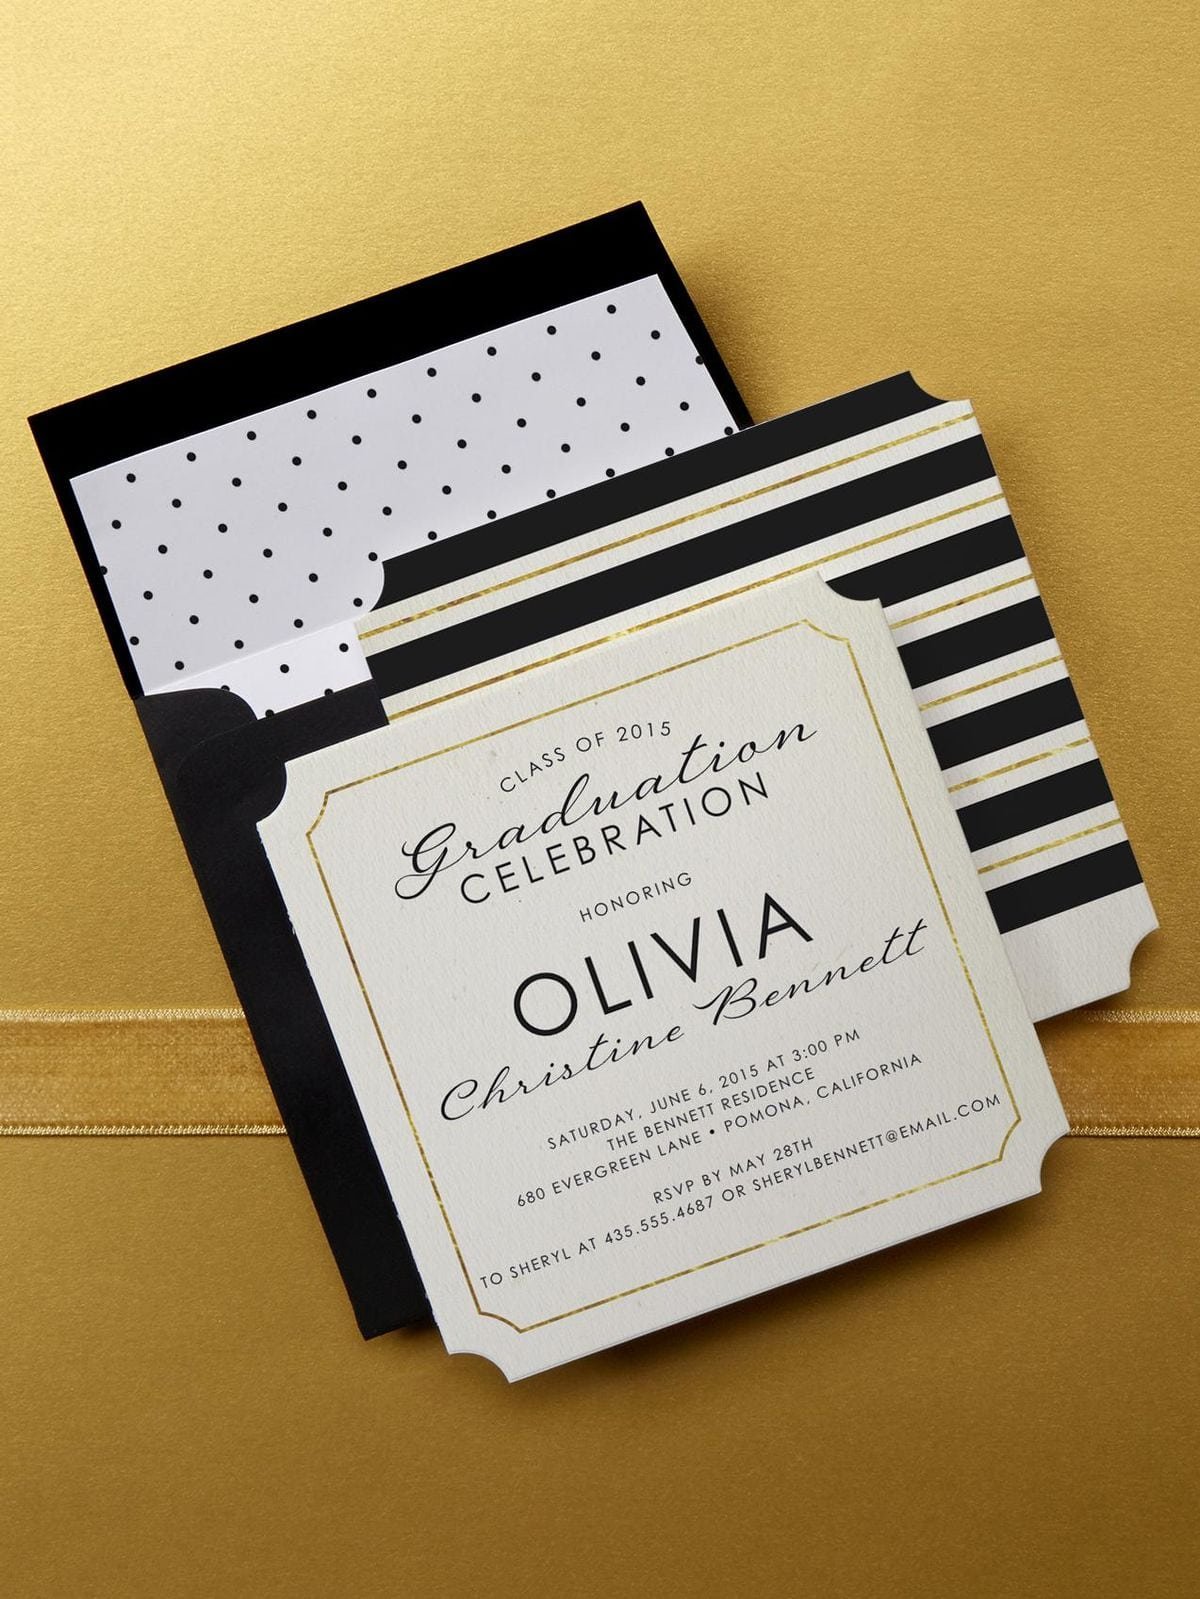 Designs   Save The Date Invitations For Graduation Party As Well